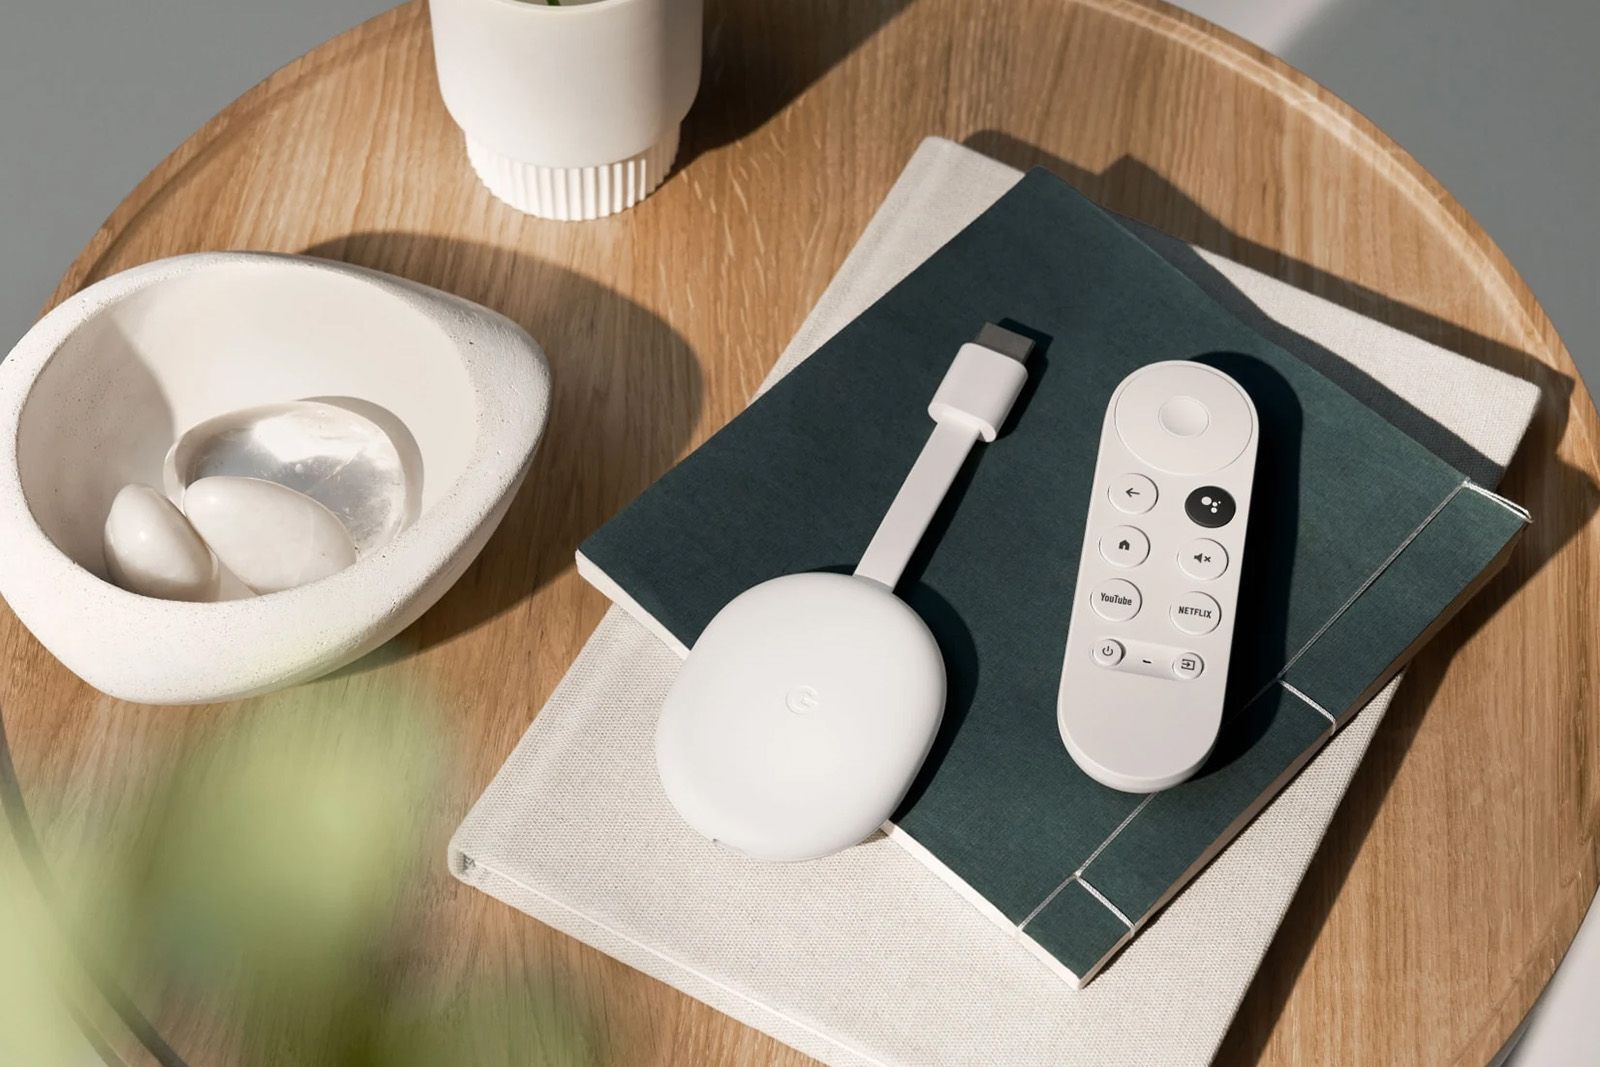 Google Chromecast and remote on a wooden table